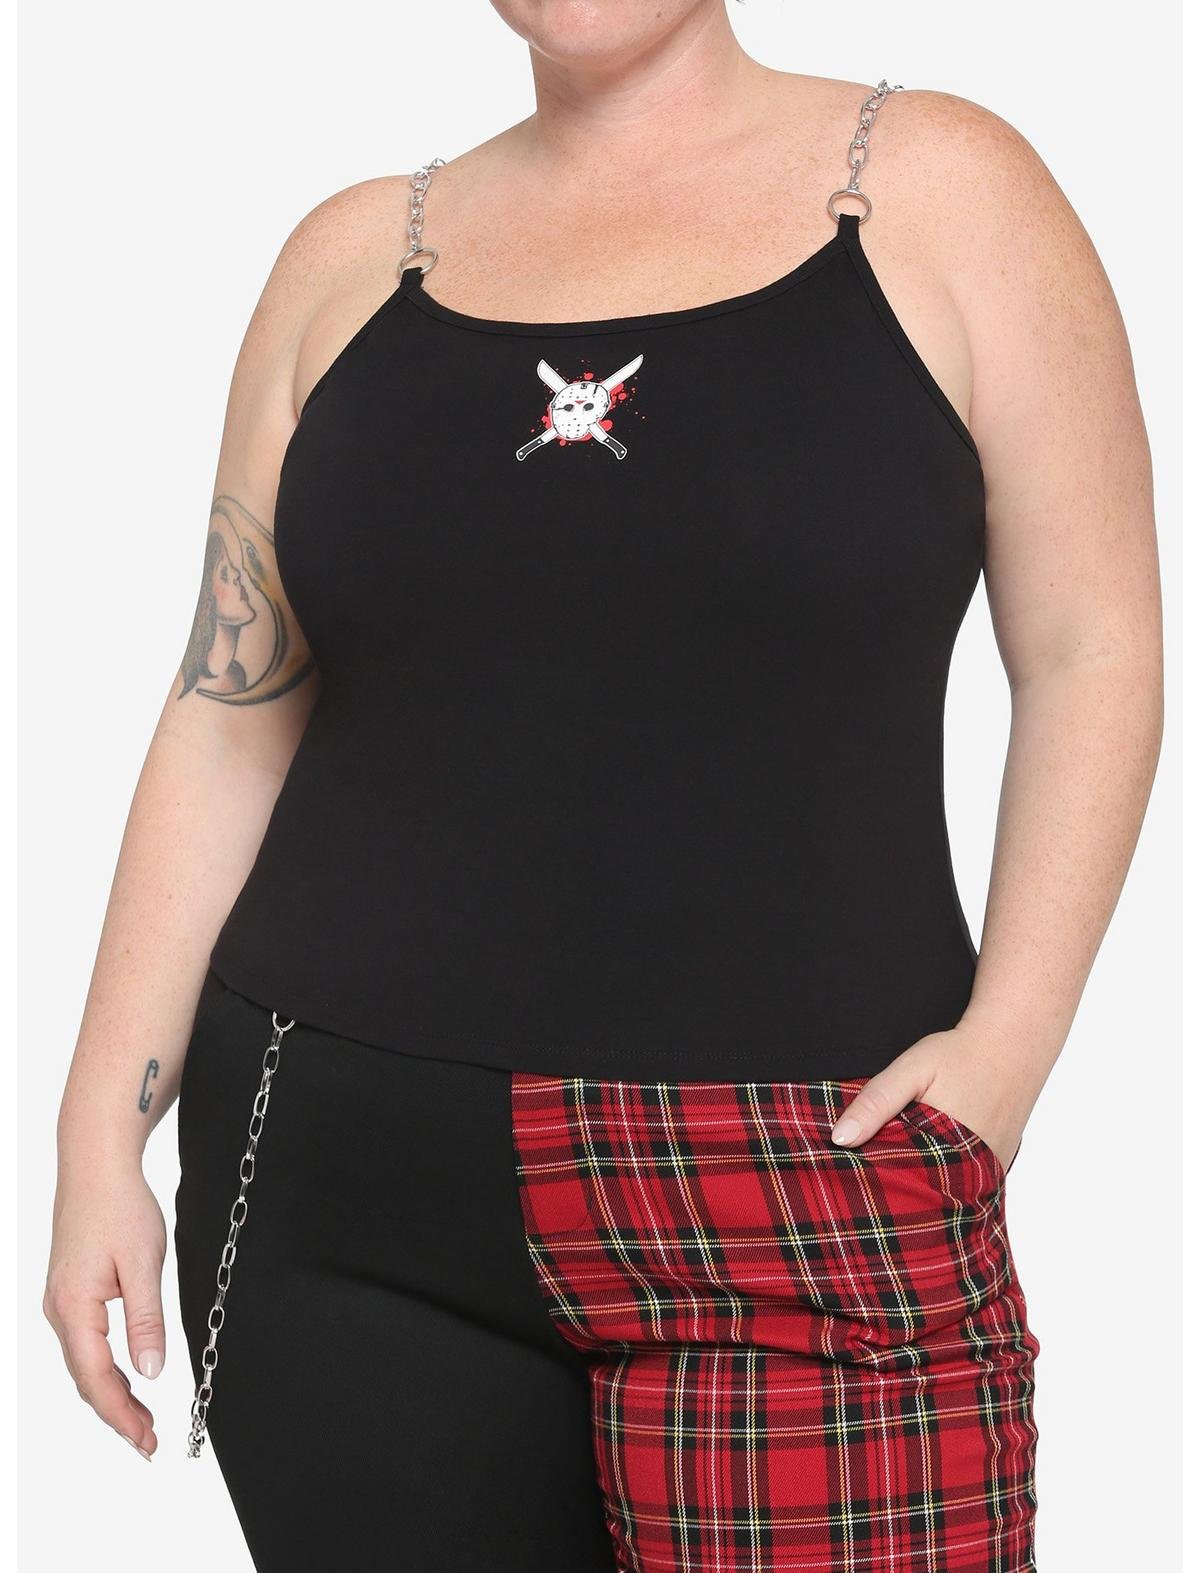 Friday The 13th Girls Chain Strap Tank Top Plus Size